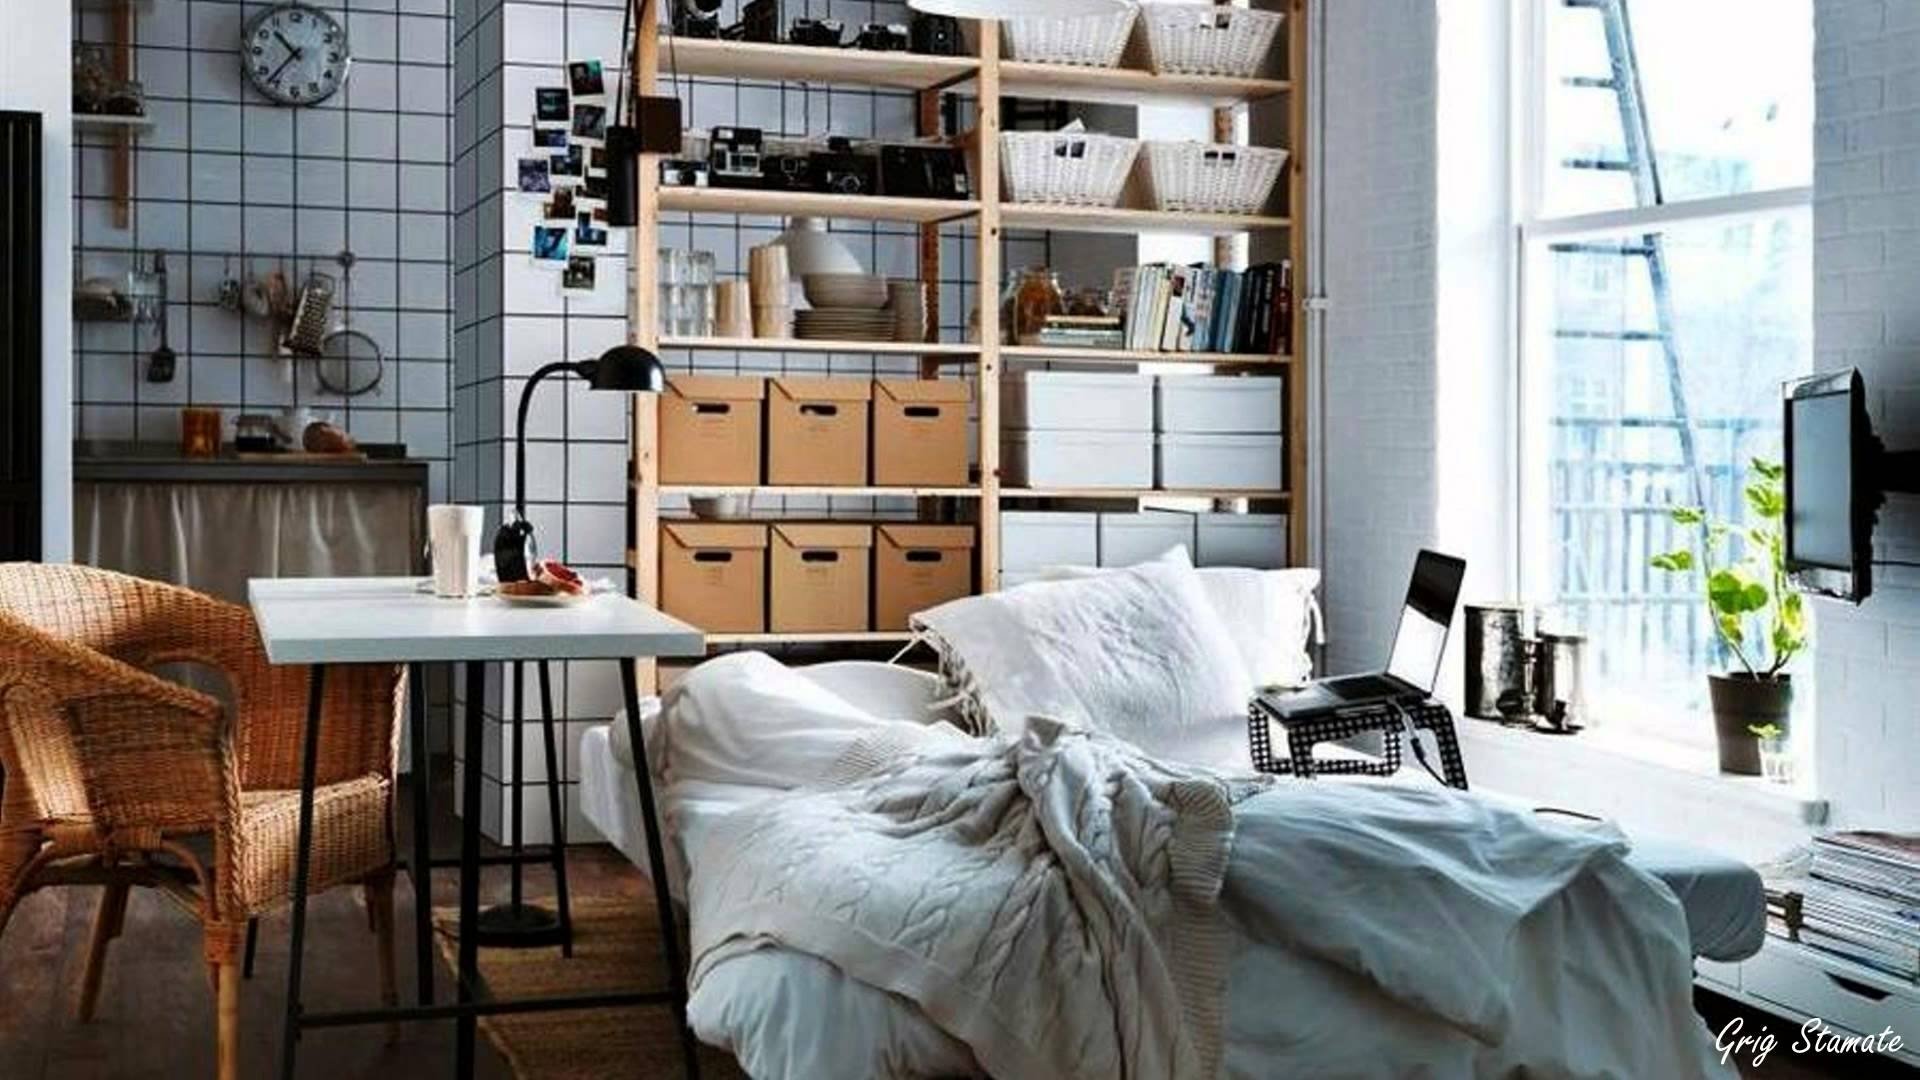 10 Awesome Storage Ideas For Small Apartment small apartment storage ideas youtube 2 2022